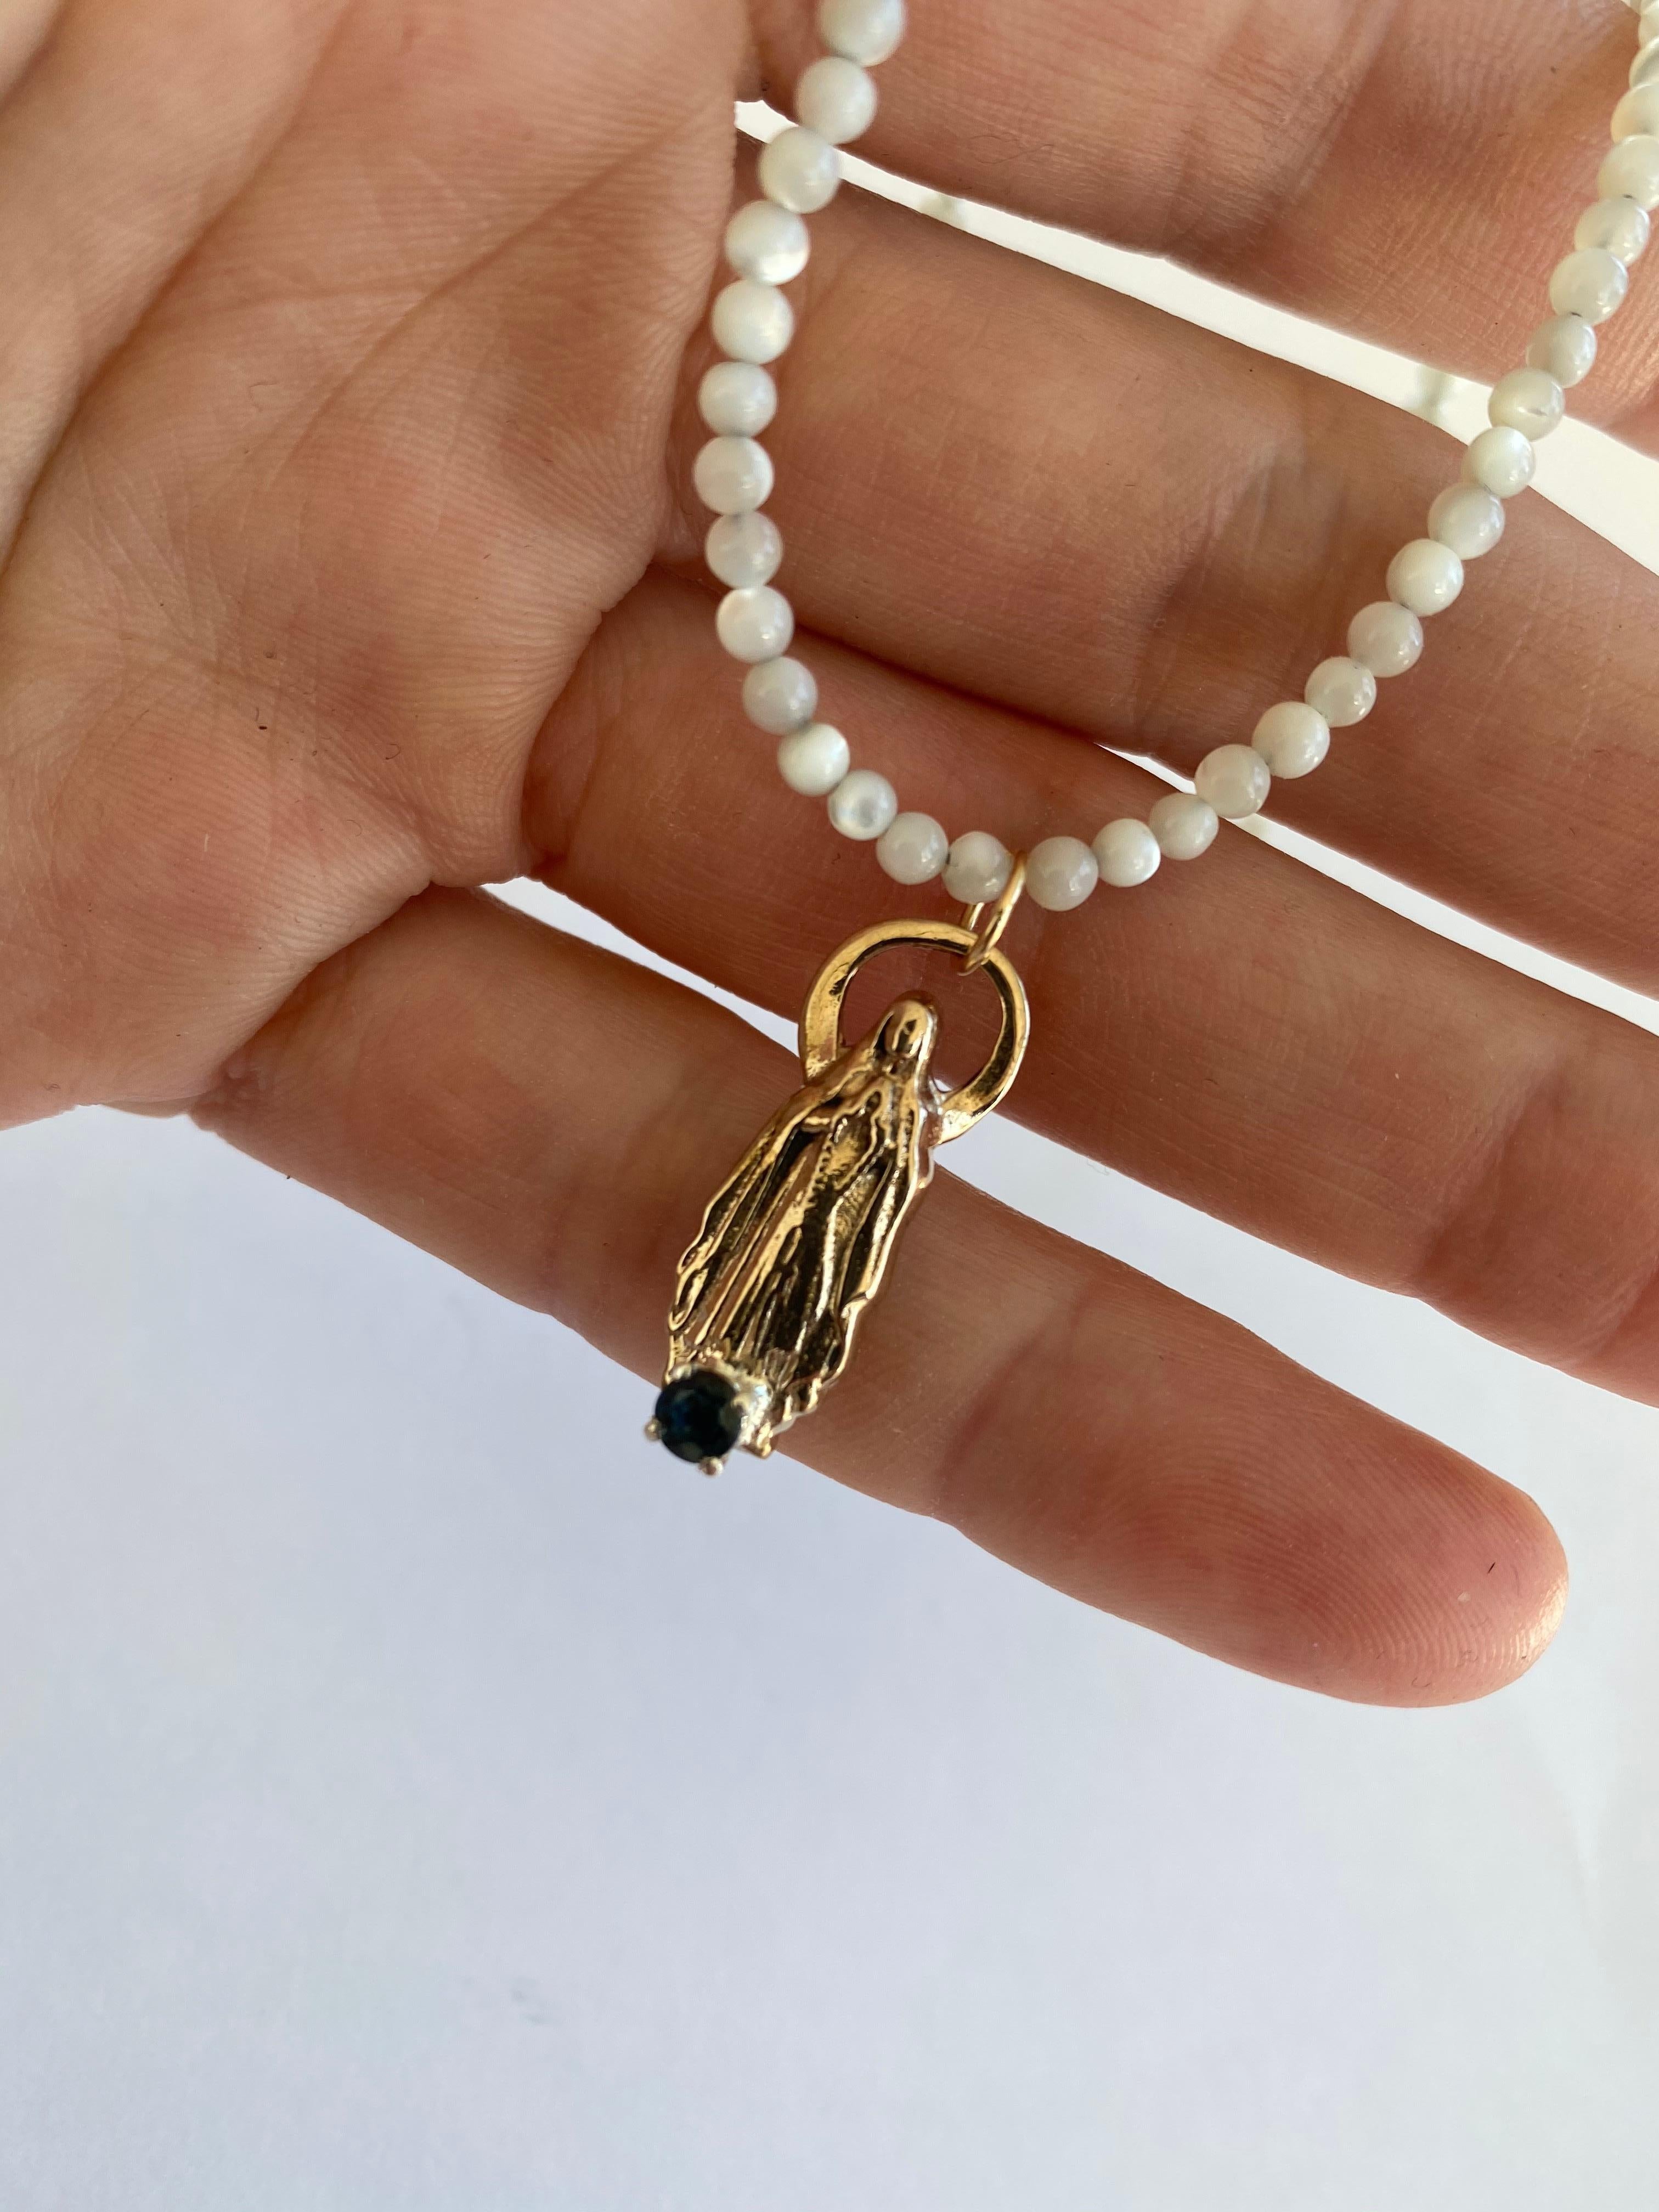 Sapphire Virgin Mary White Bead Necklace J Dauphin

Exclusive piece with Virgin Mary pendant and a Blue Sapphire set in a gold prong on a Bronze Figurine pendant. Bead Necklace is 16' long.

Symbols or medals can become a powerful tool in our